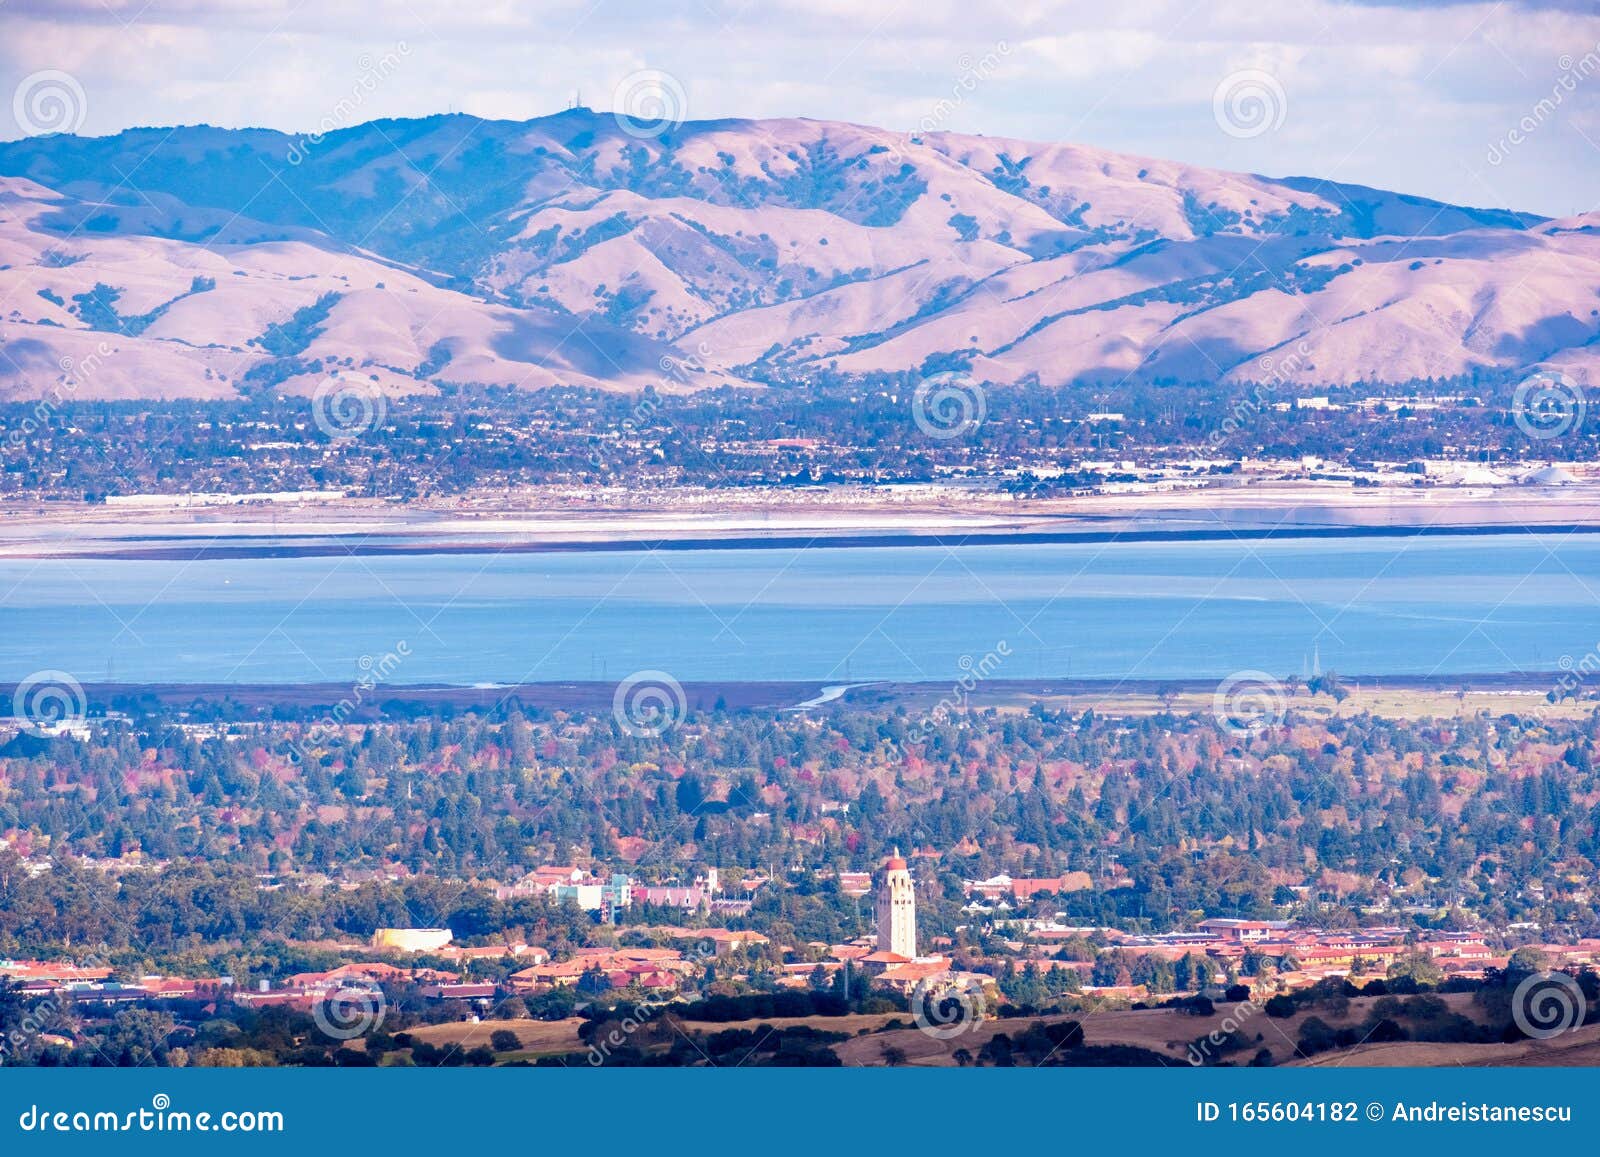 aerial view of stanford university amd palo alto, san francisco bay area; newark and fremont and the diablo mountain range visible